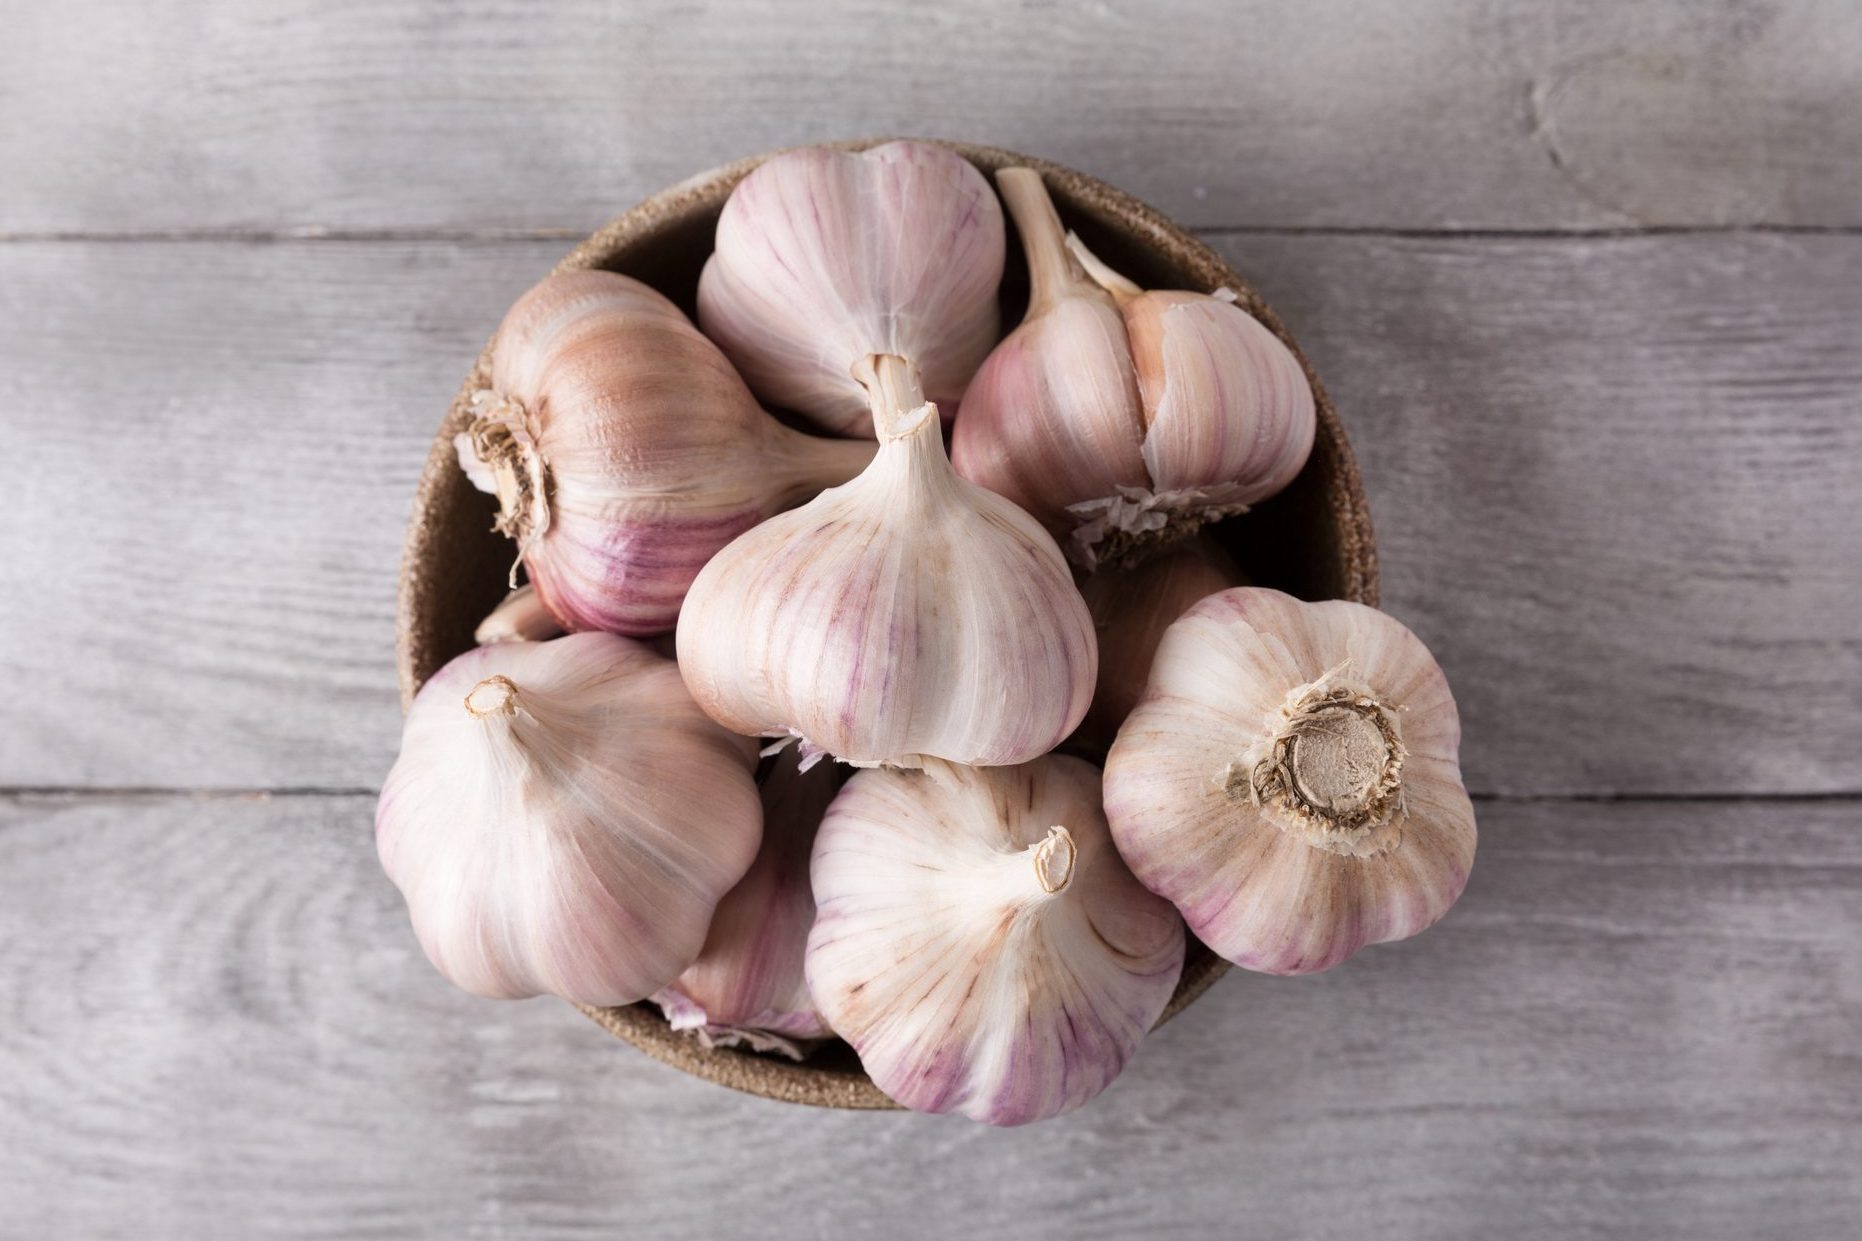 How Long Does Garlic Last? How to Store Garlic to Keep It Fresh